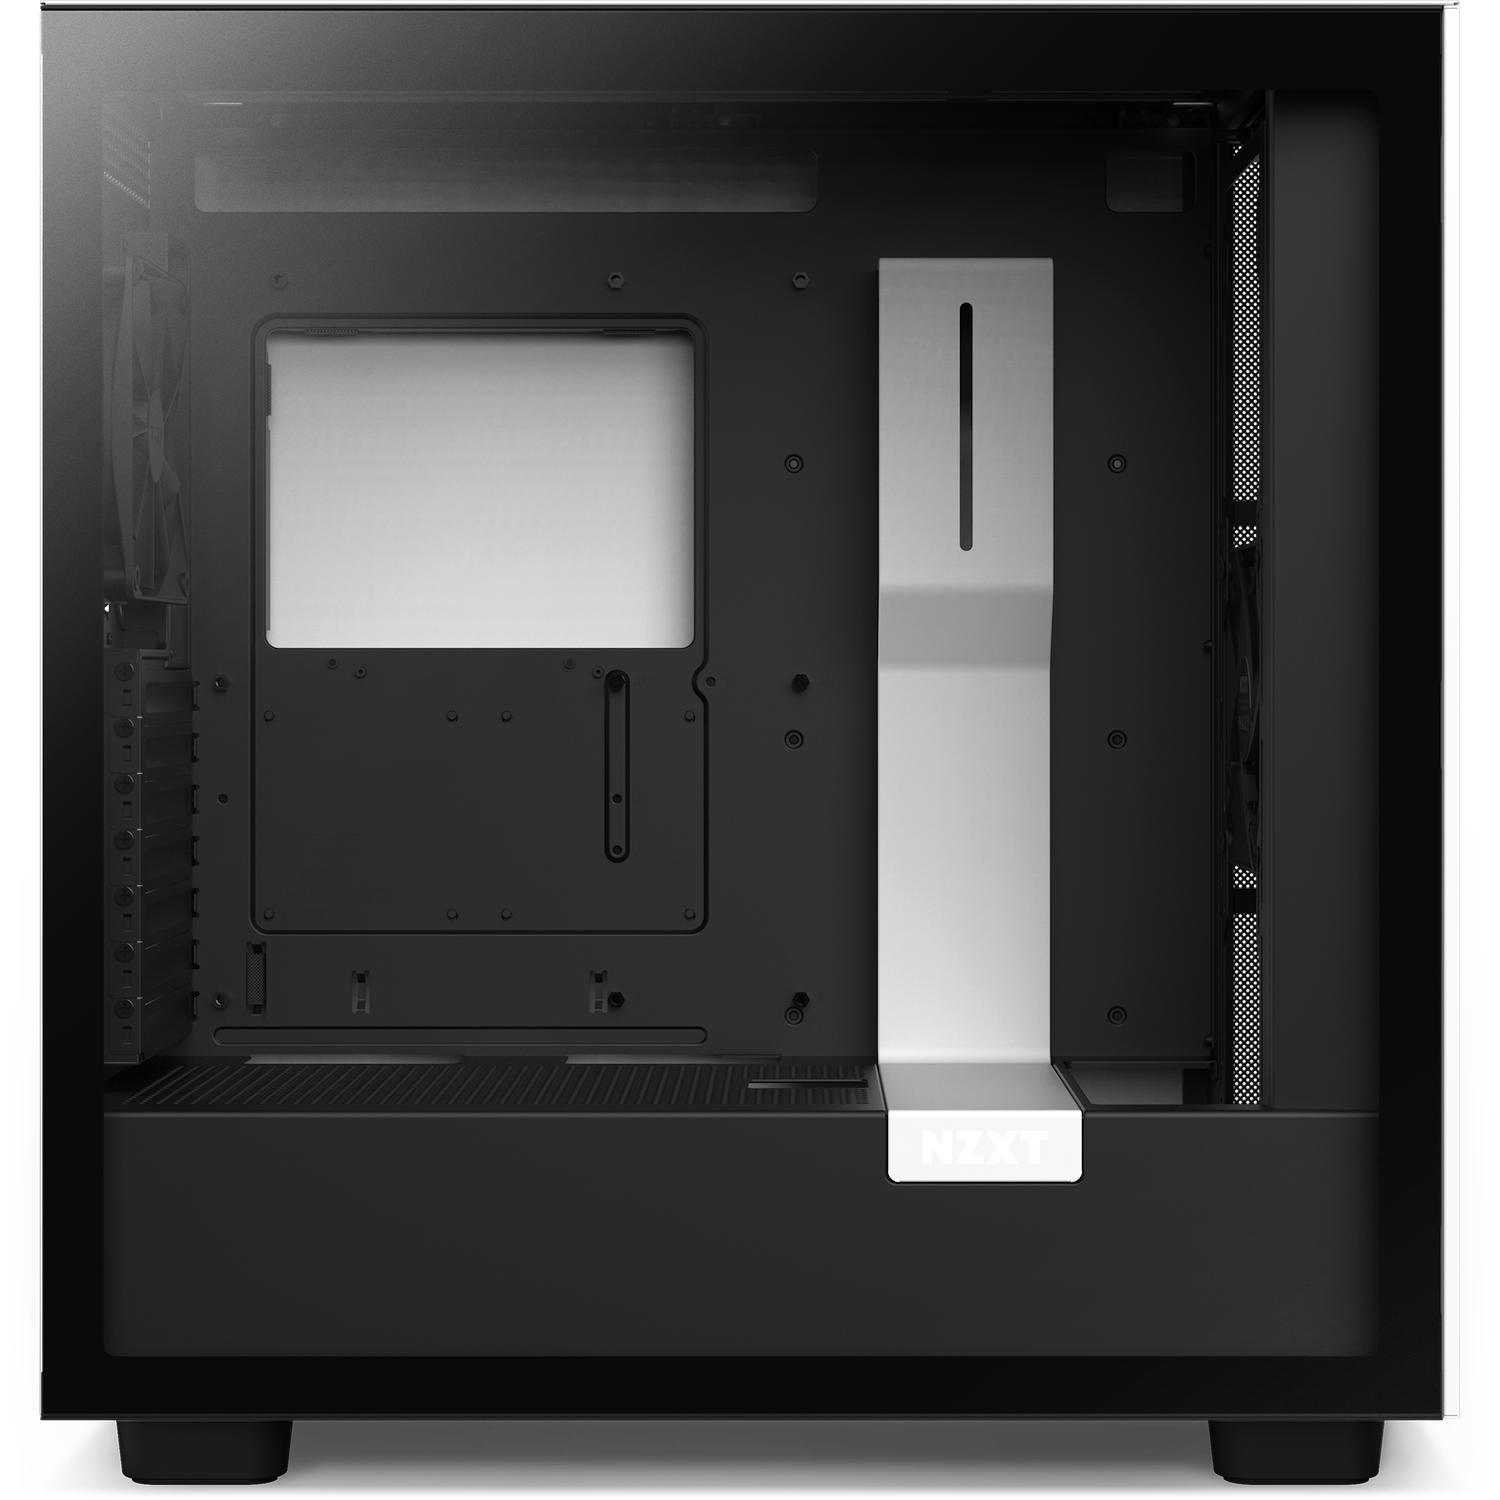 NZXT H7 | ATX Tempered Glass Case (Black & White)